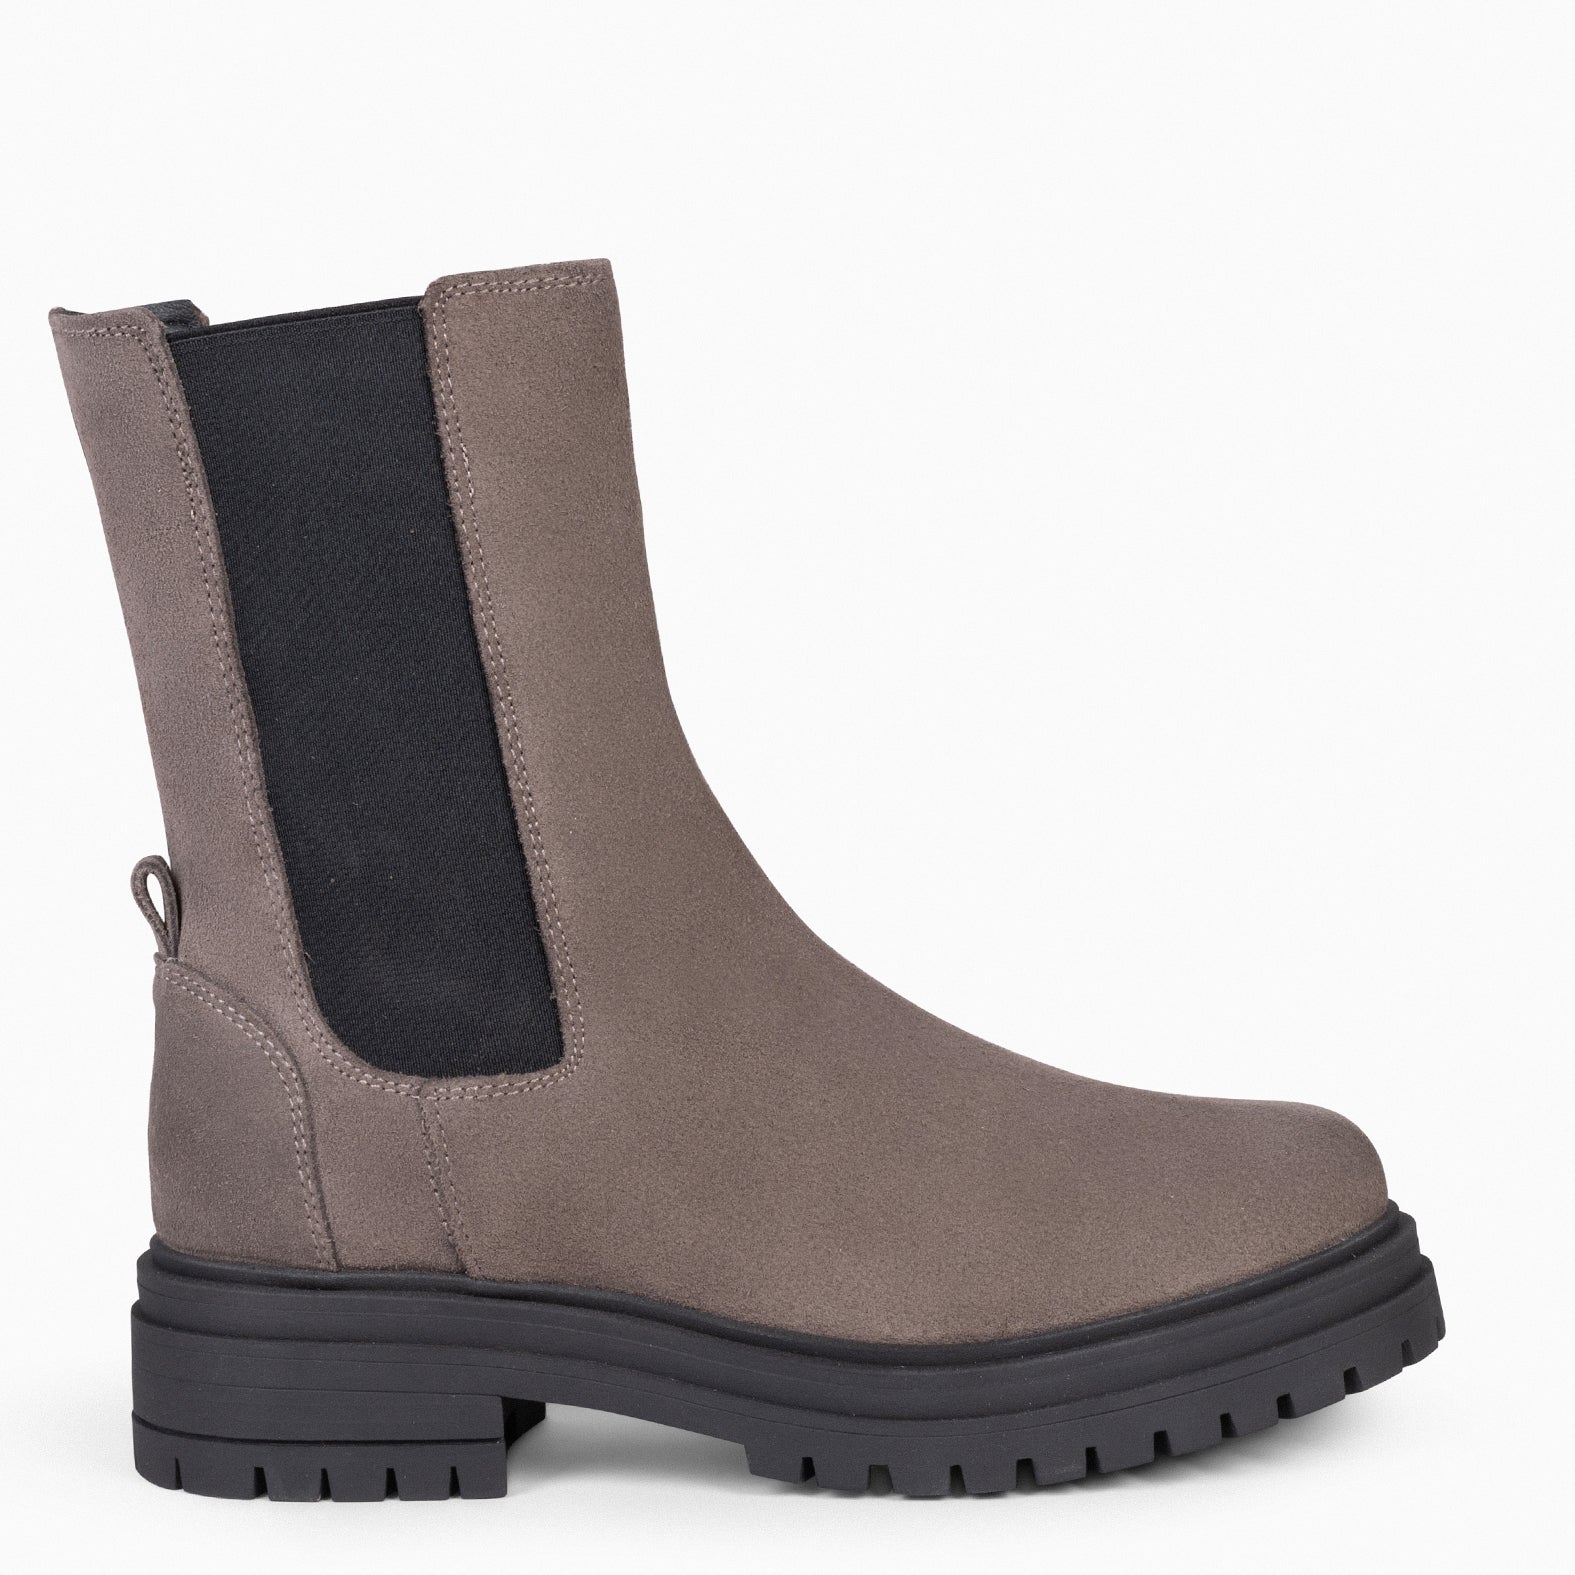 STANFORD – TAUPE Chelsea Boots with Track Platform